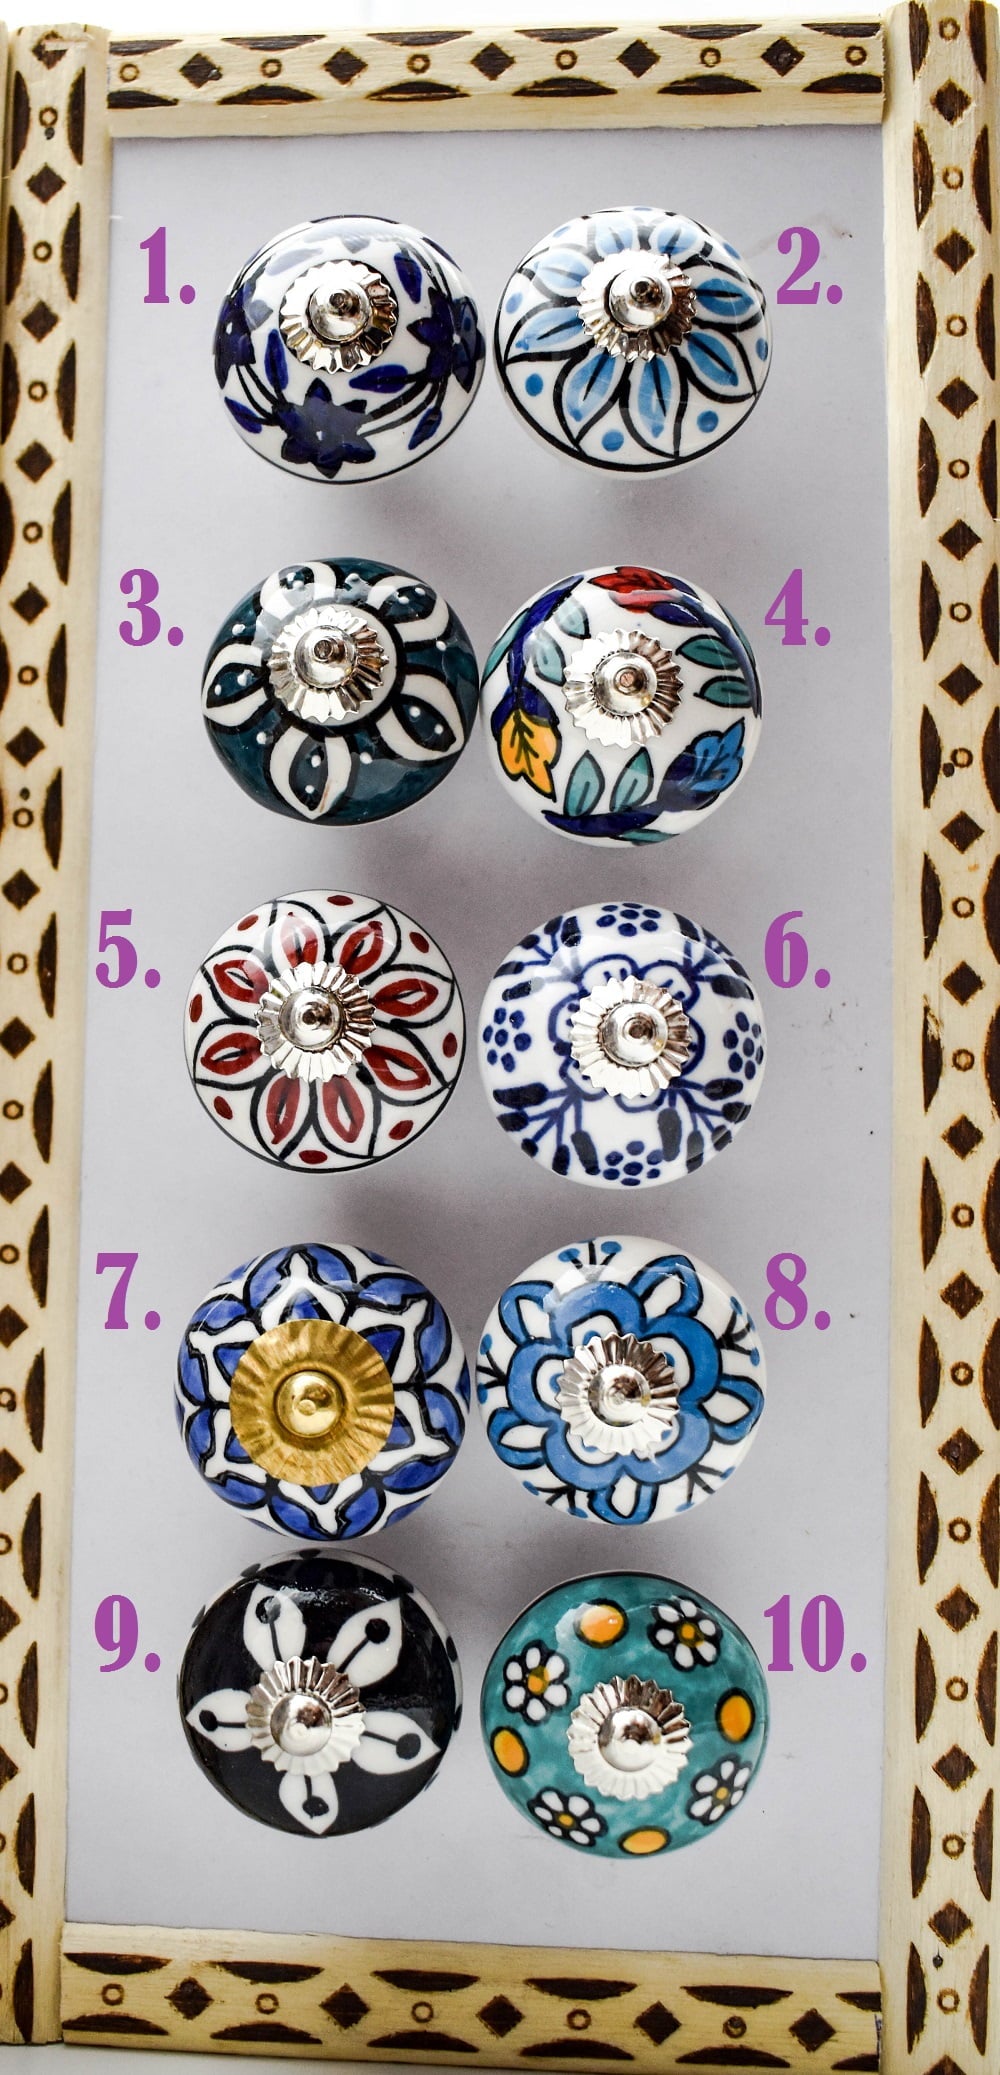 Ceramic Floral Door Knobs - For Cupboards and Drawers